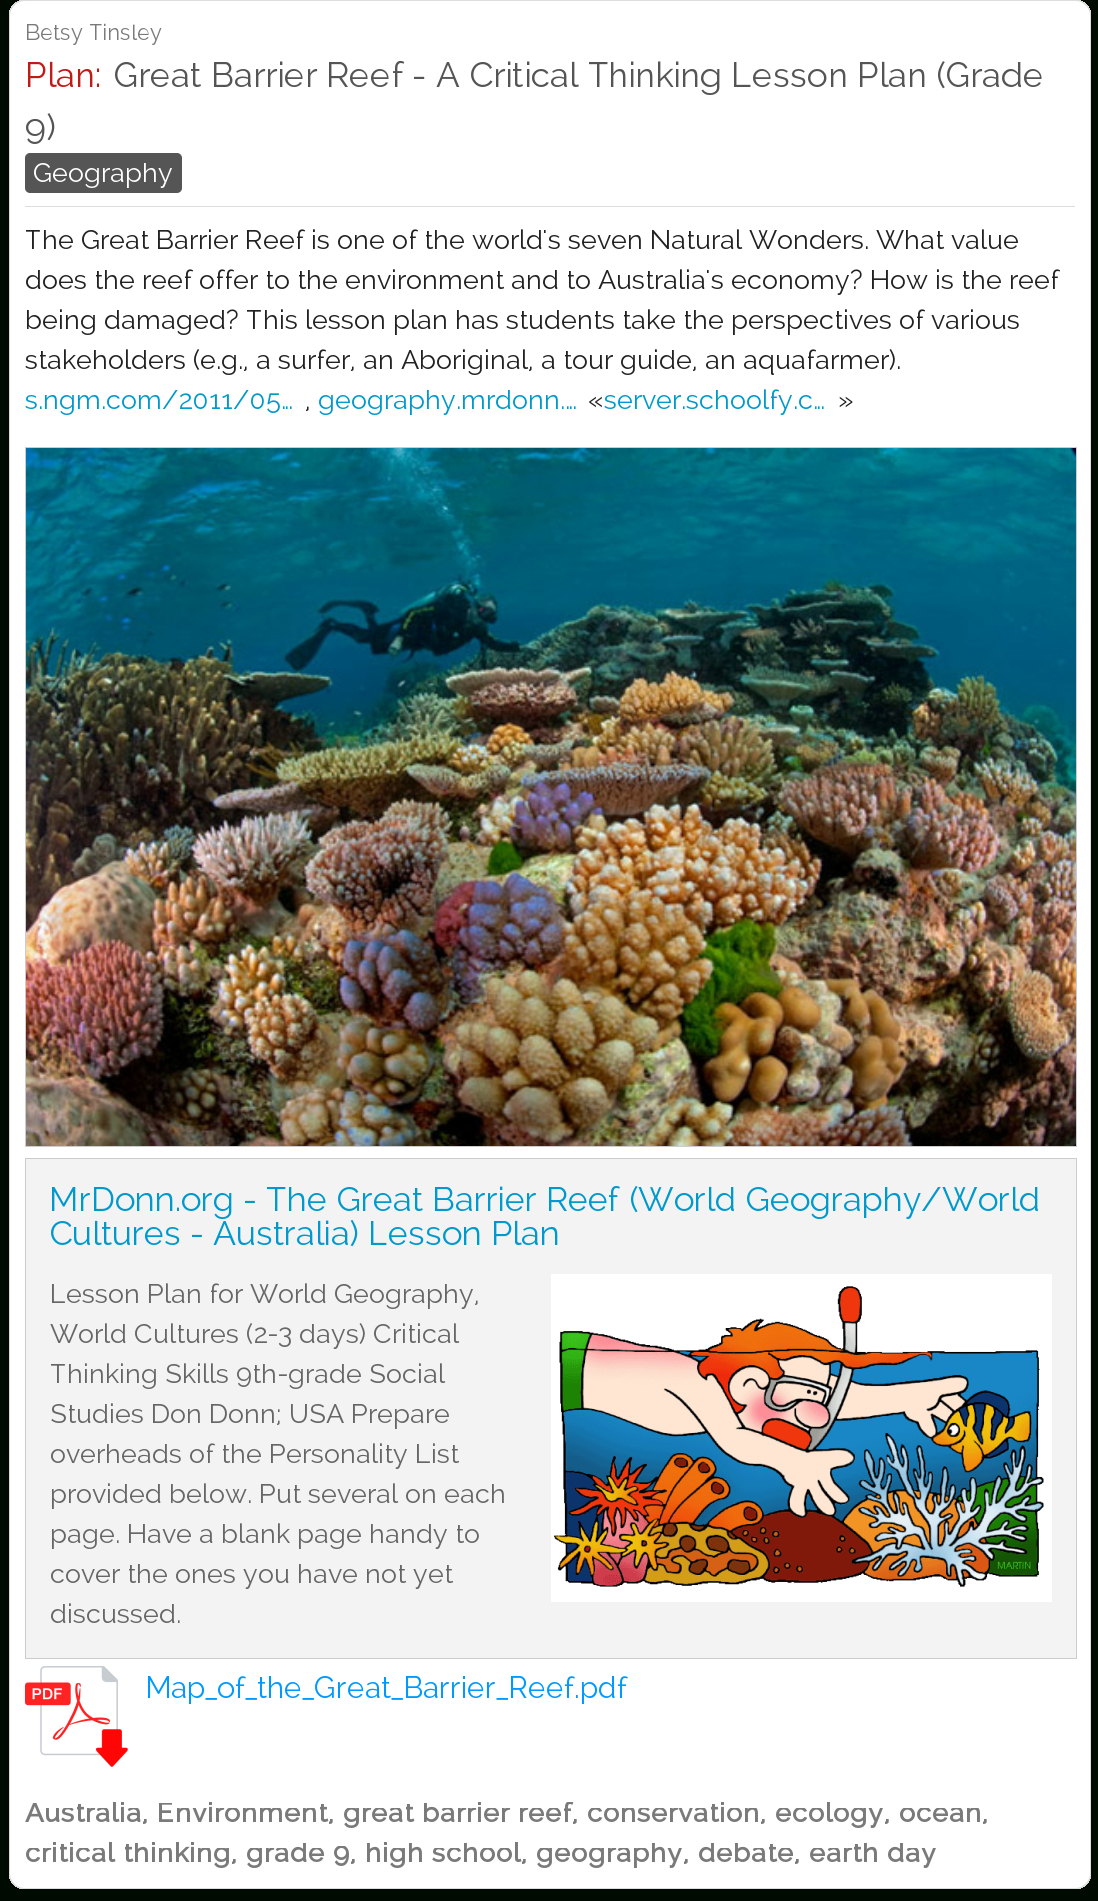 Great Barrier Reef - A Critical Thinking Lesson Plan (Grade